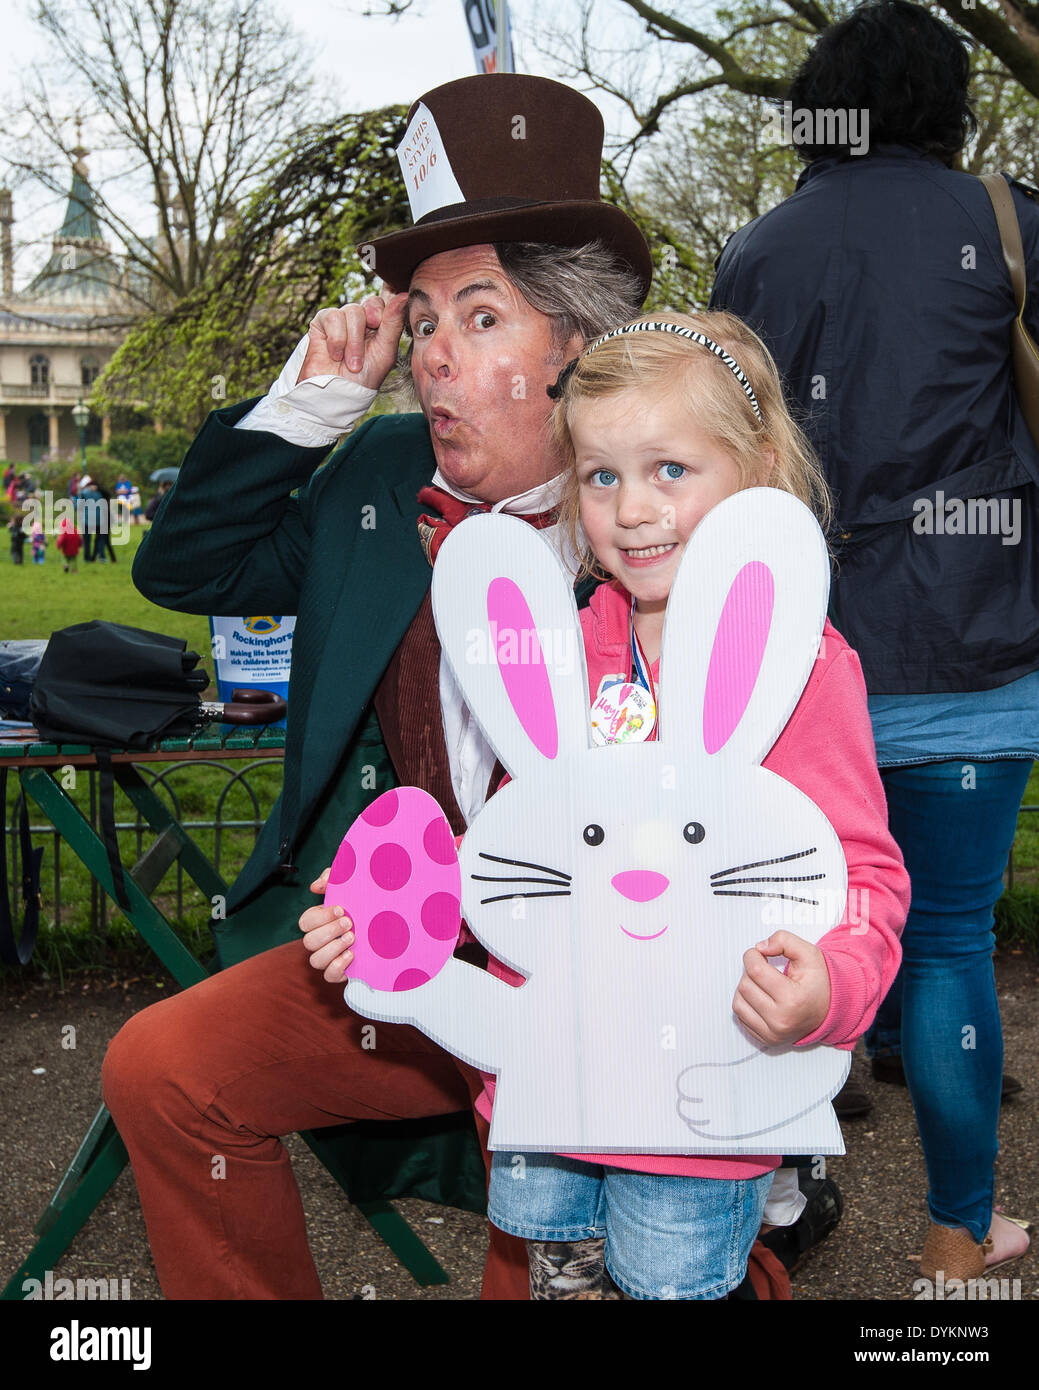 Brighton, UK. 21st Apr, 2014. The Mad Hatter [Rob Marks] with Hayley Lewis at the Easter egg games as Brighton & Hove Food and Drink Festival hold an Easter Egg hunt in aid of the children's charity Rockinghorse in Pavilion Gardens, Brighton. Children complete games to find Easter eggs around the Brighton Pavilion gardens: egg and spoon race, skipping, quoits and card games before making a badge and receiving a medal for their efforts. The event is sponsored by PHS Group PLC and raises over £400 for the Rockinghorse charity.  Credit:  Julia Claxton/Alamy Live News Stock Photo